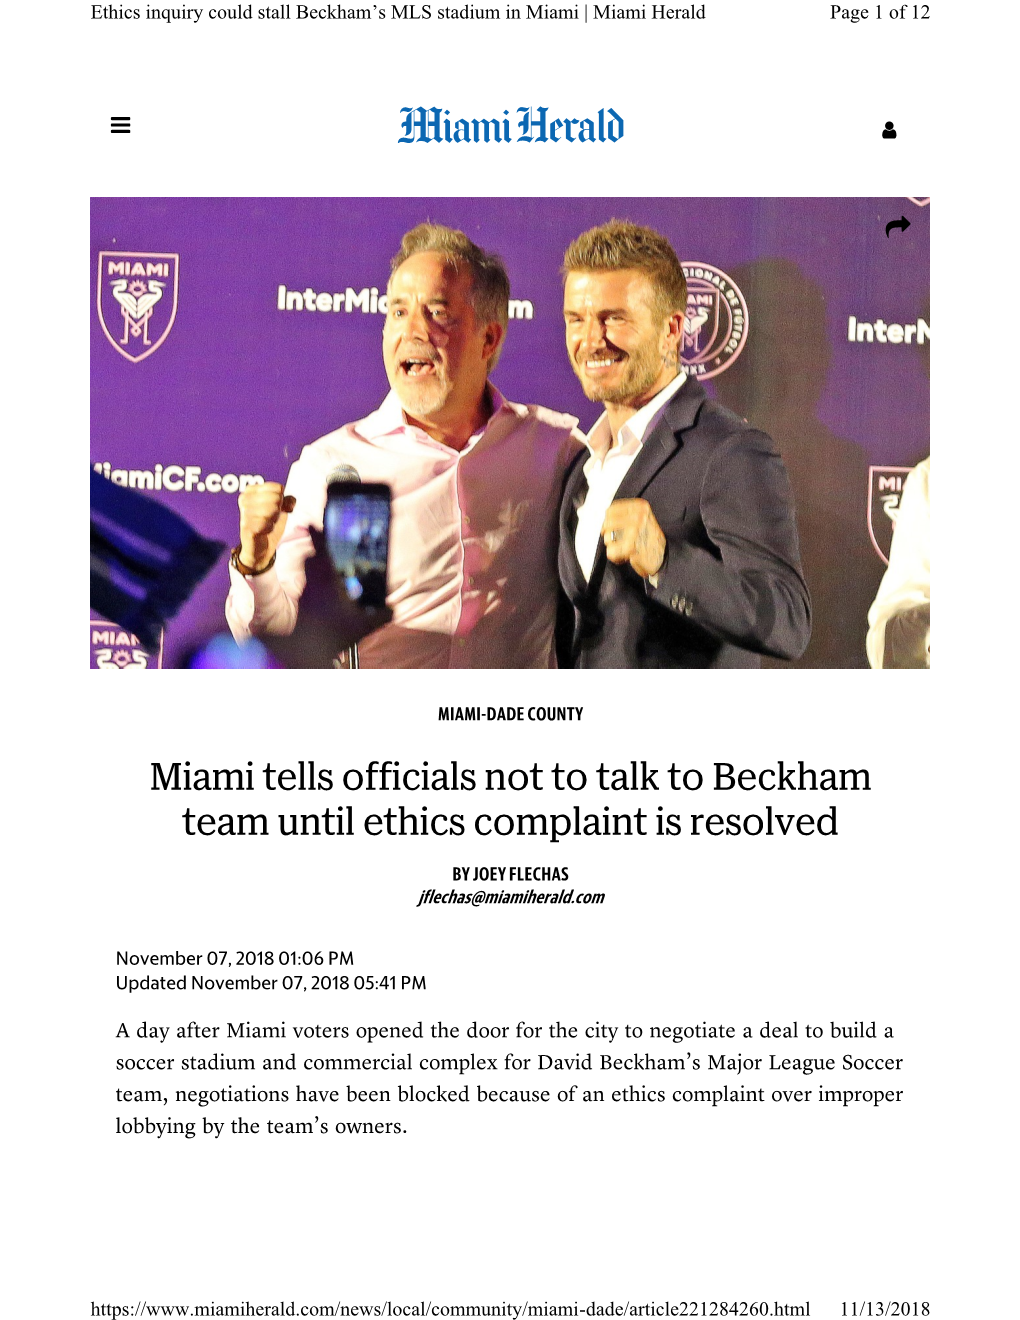 Miami Tells Officials Not to Talk to Beckham Team Until Ethics Complaint Is Resolved